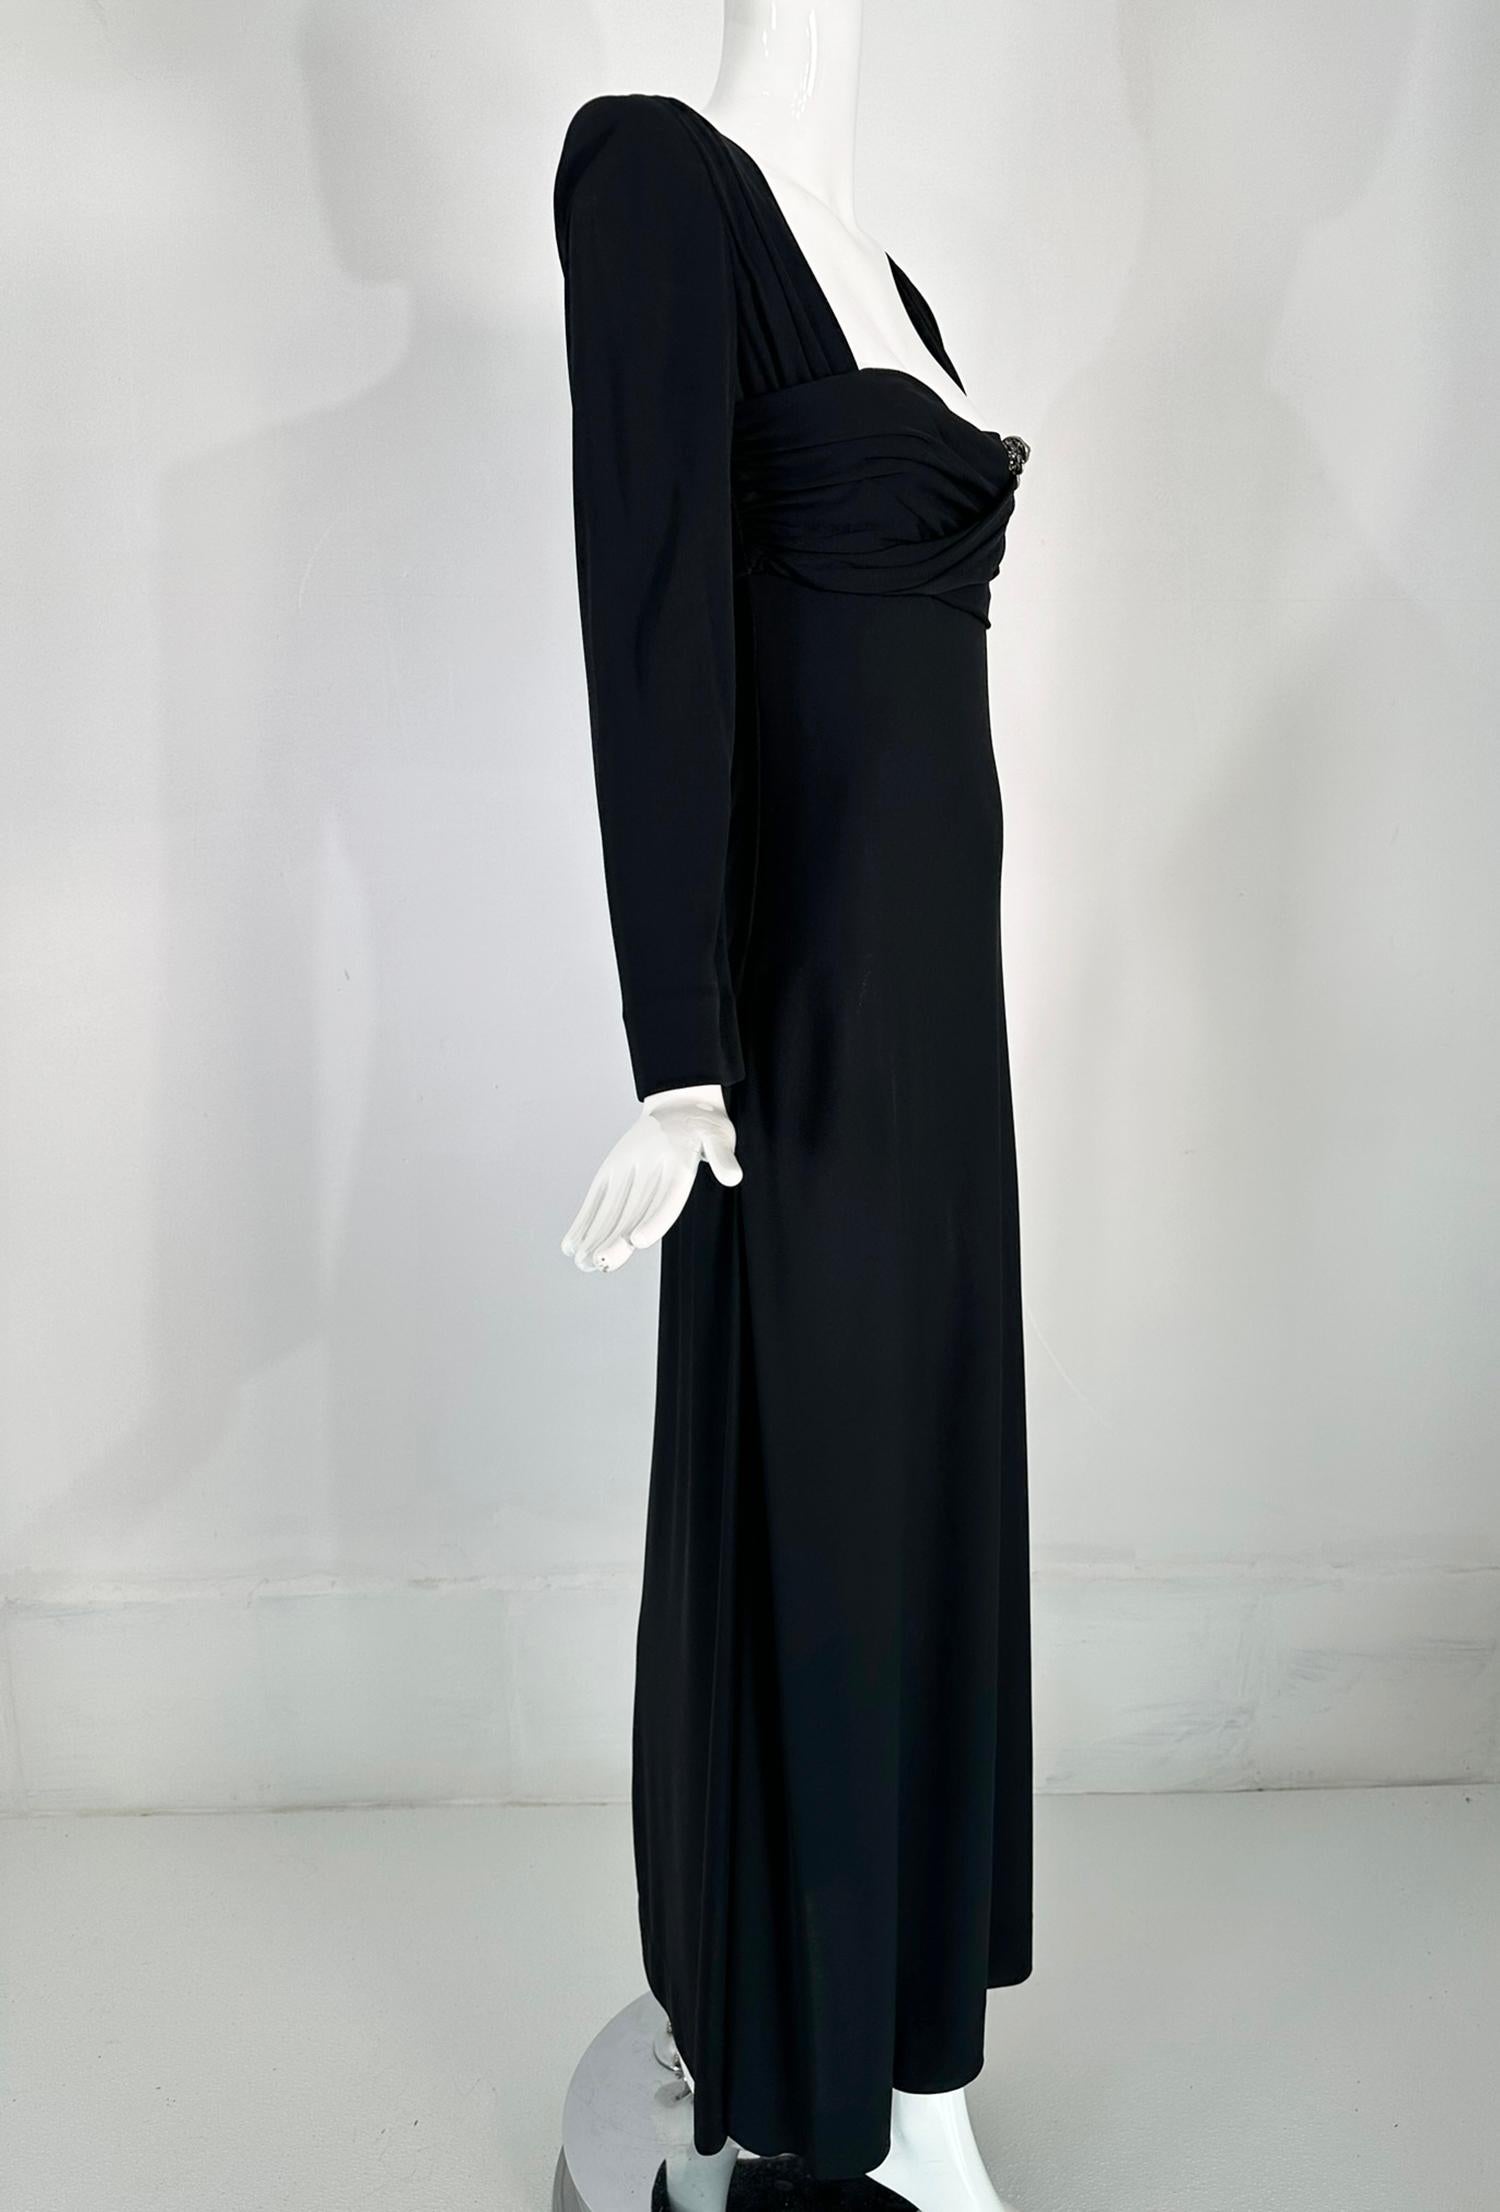 Women's 1940s Couture Old Hollywood Silky Black Jersey Shoulder drape Evening Gown 